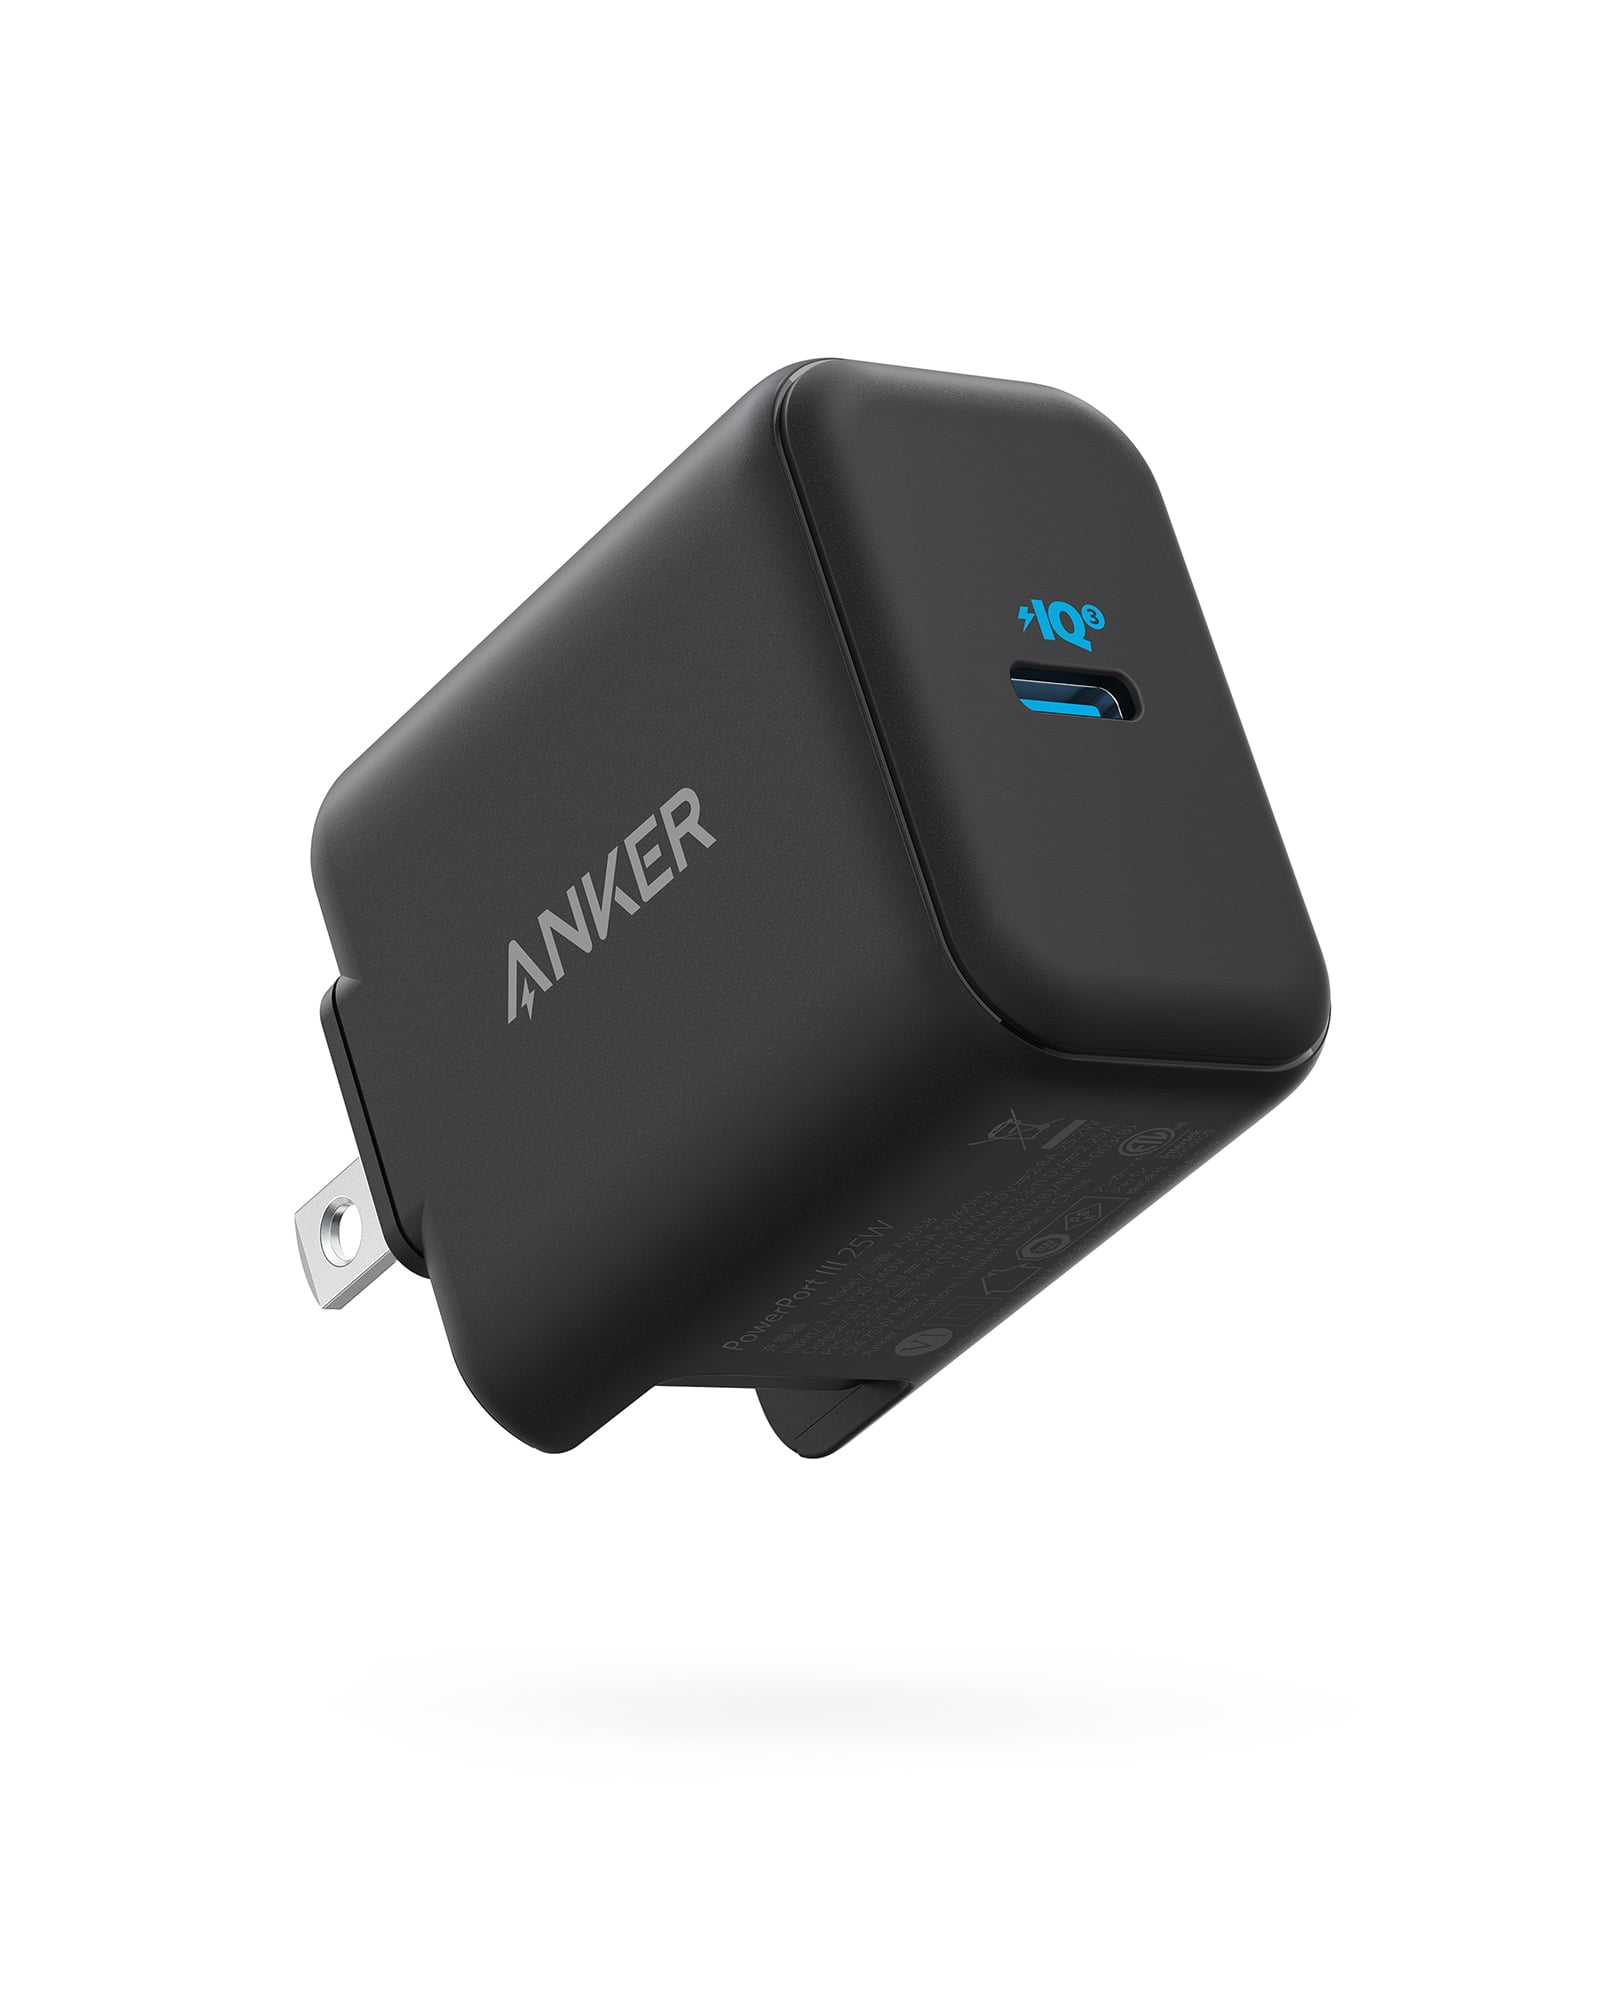 Anker PowerPort III 25W Power Delivery Wall Charger, Fast Charging for Samsung Galaxy, iPhone, iPad and More (Cable Not Included)